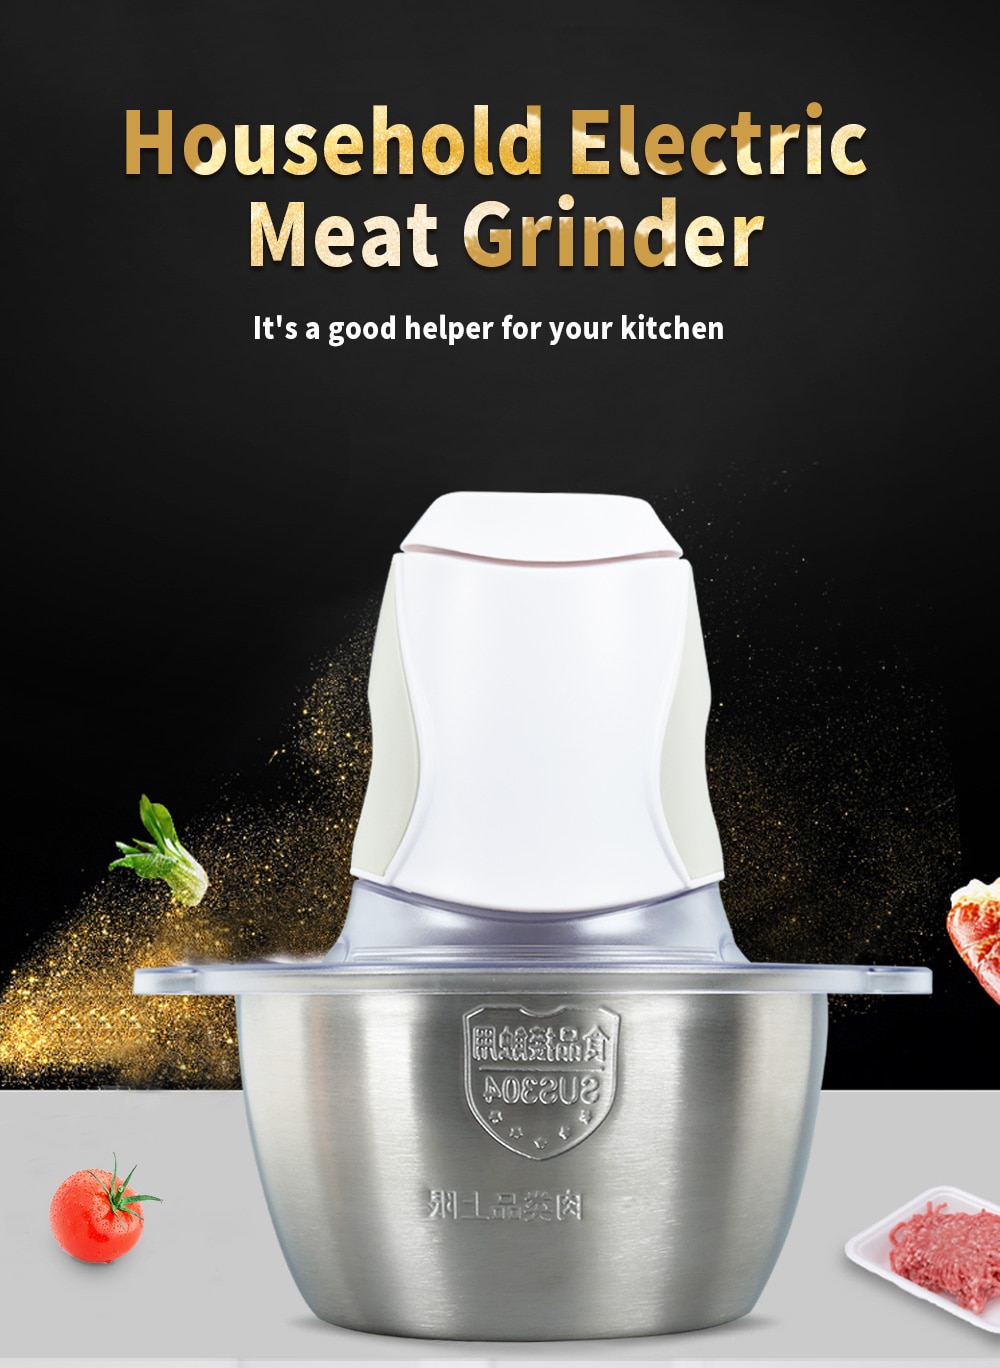 FIMEI 200W 220V Household Electric Meat Grinder Stainless Steel Bowl Mixer Chopper With S-Shaped Blade